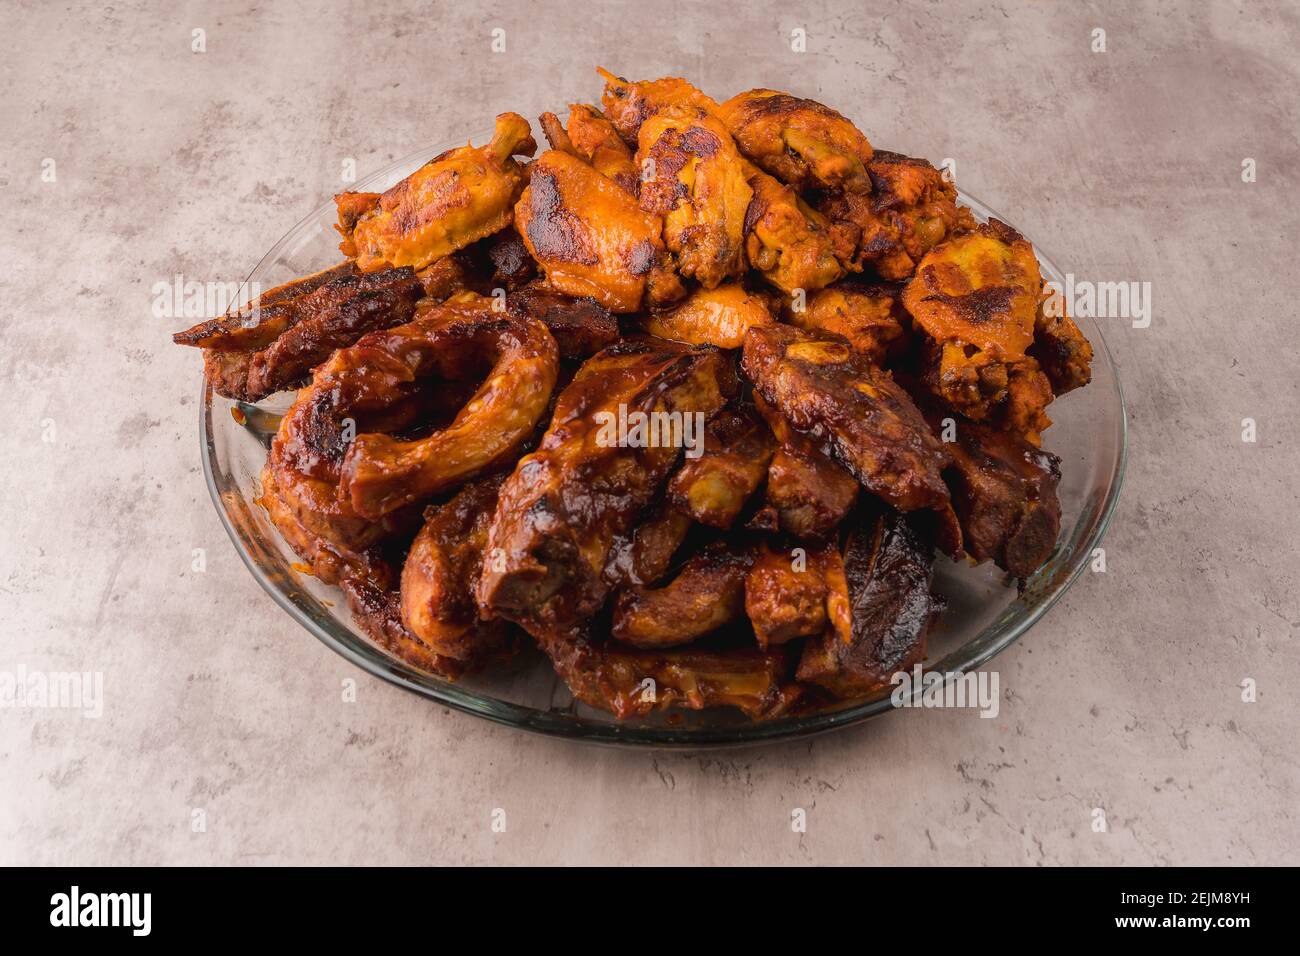 Plate with hot pork ribs prepared on the grill with BBQ sauce Stock Photo